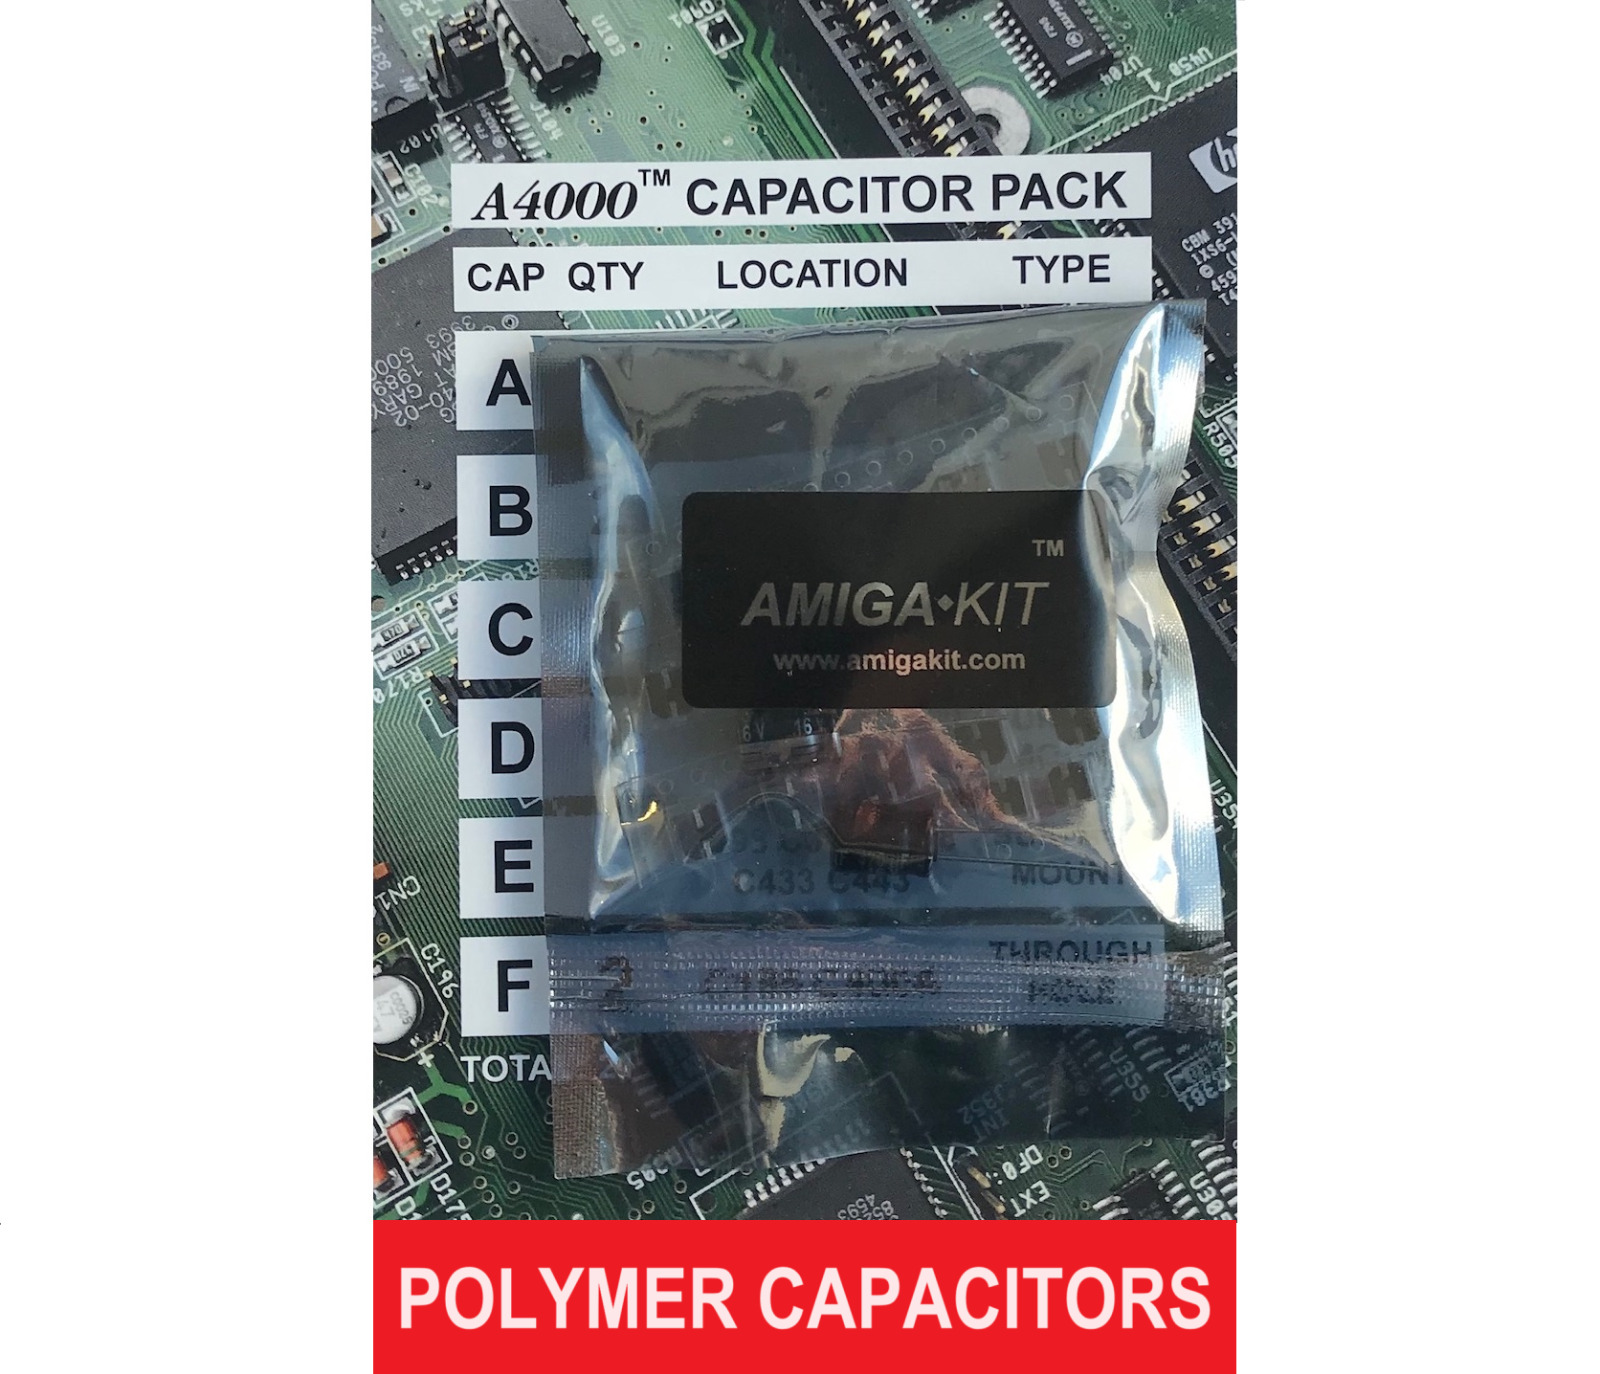 Premium Polymer Capacitor Pack for Amiga 4000 A4000 Recapping New Amiga Kit